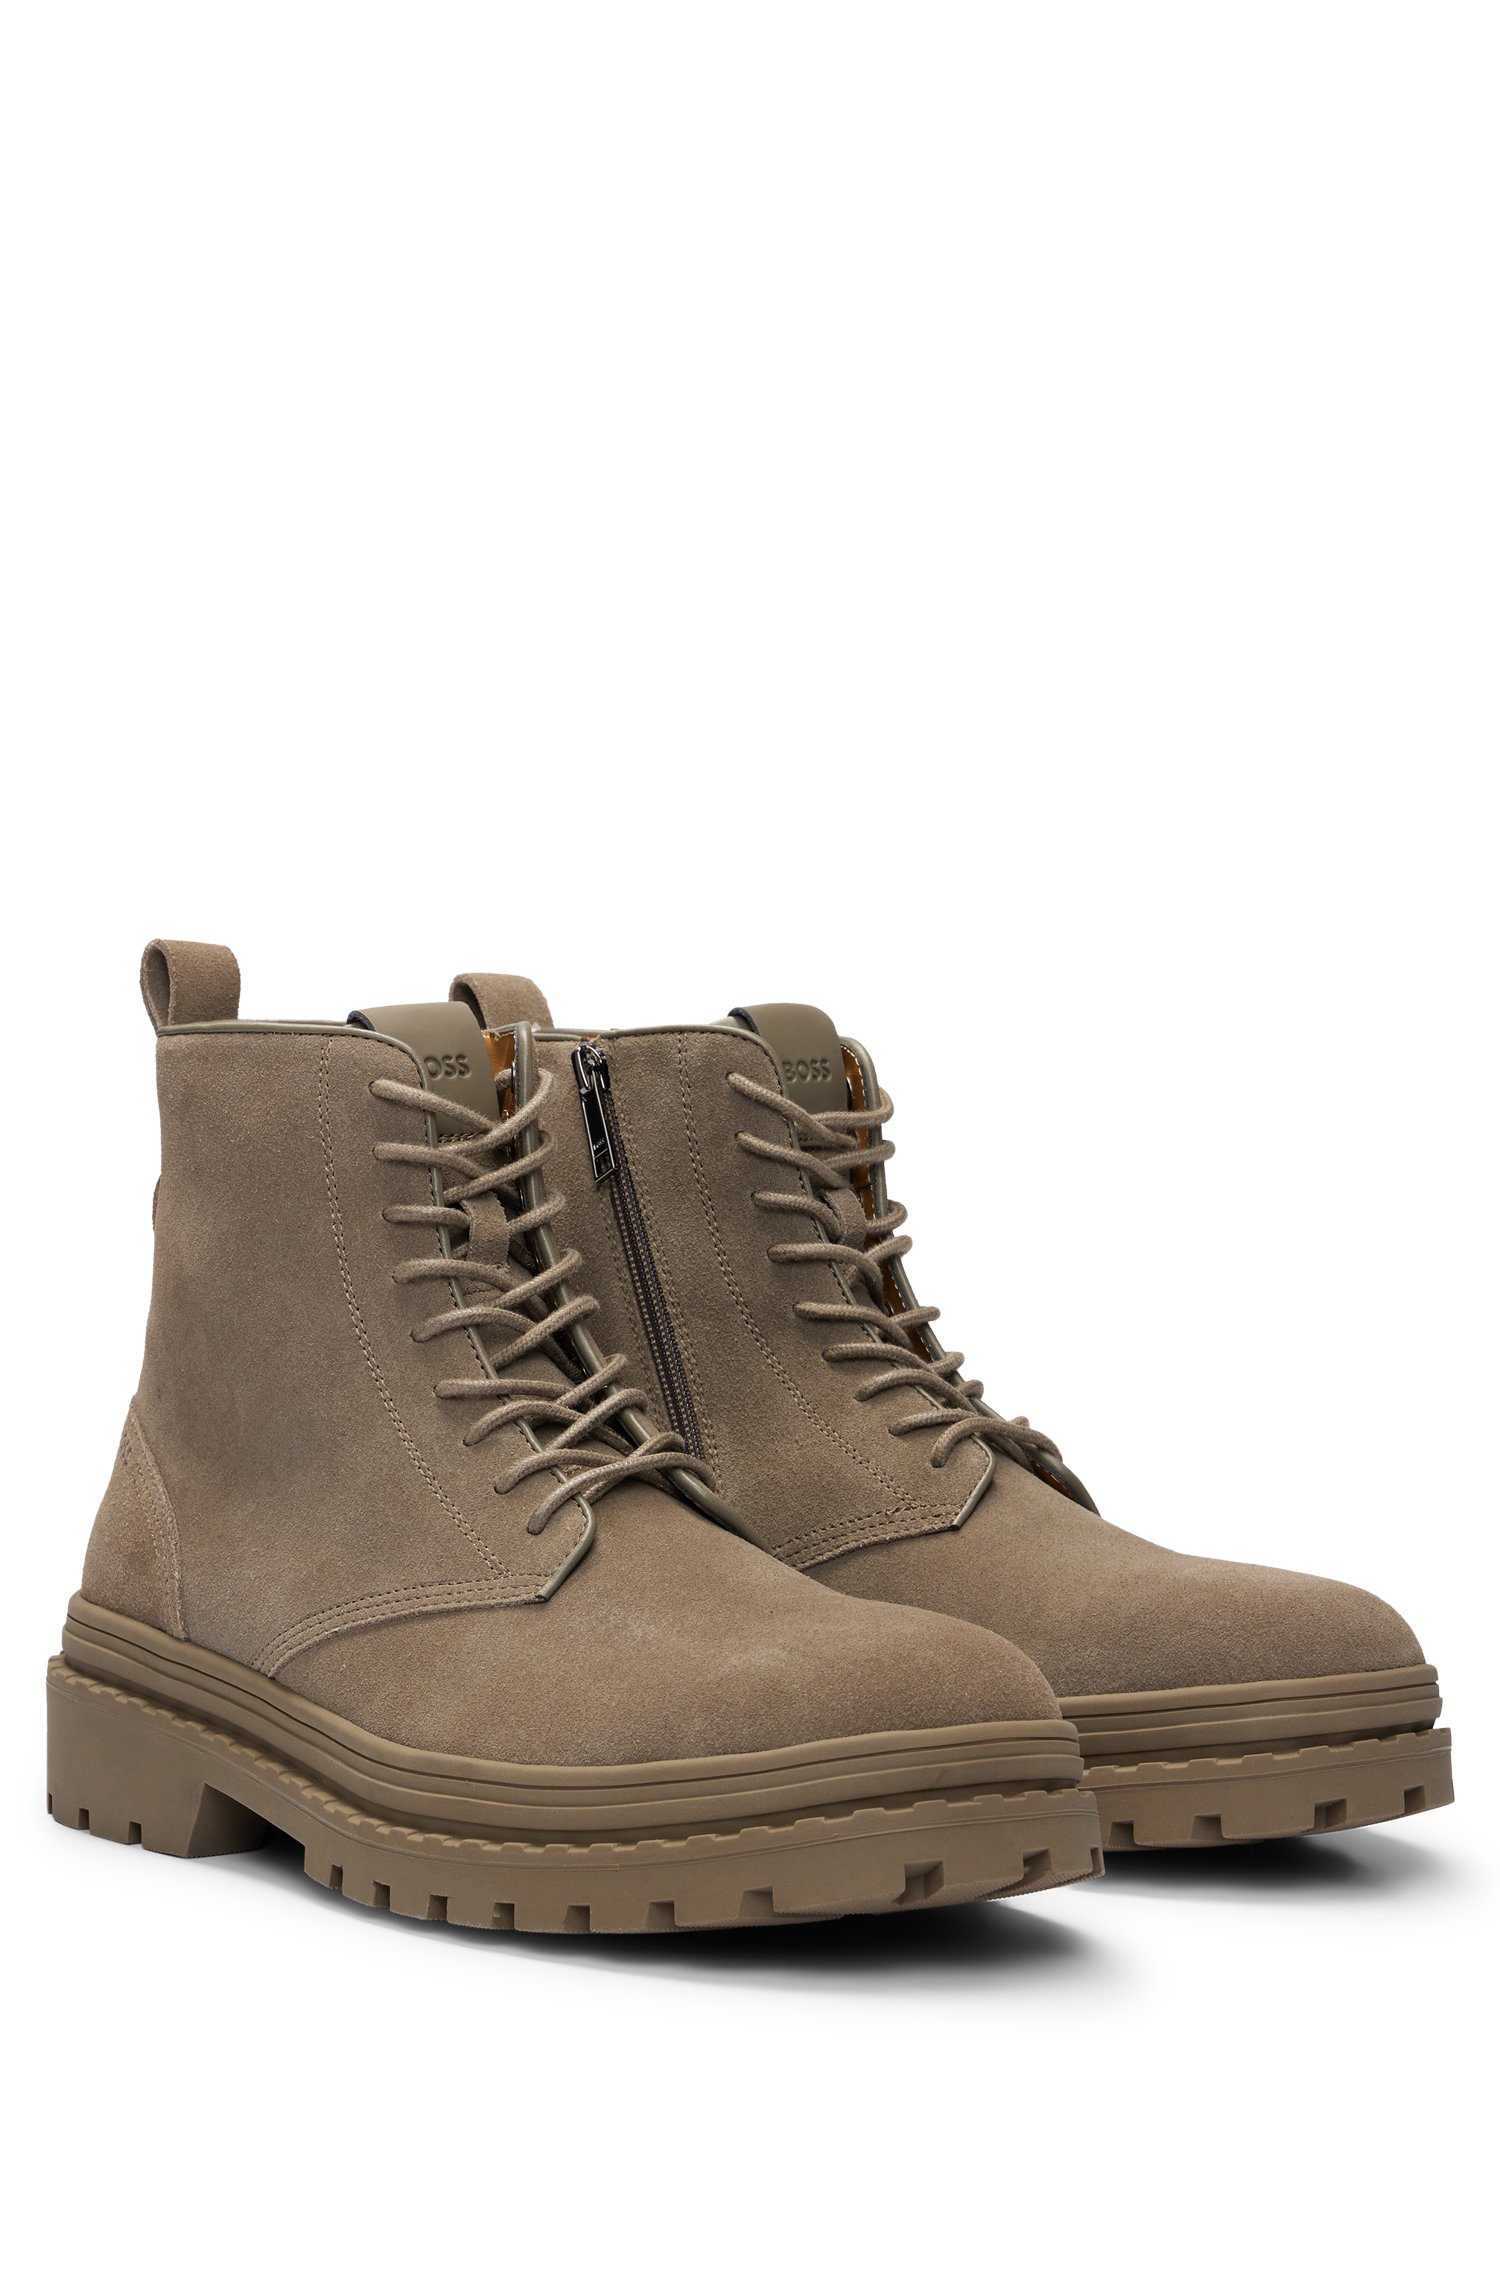 Suede lace-up boots with rubber outsole